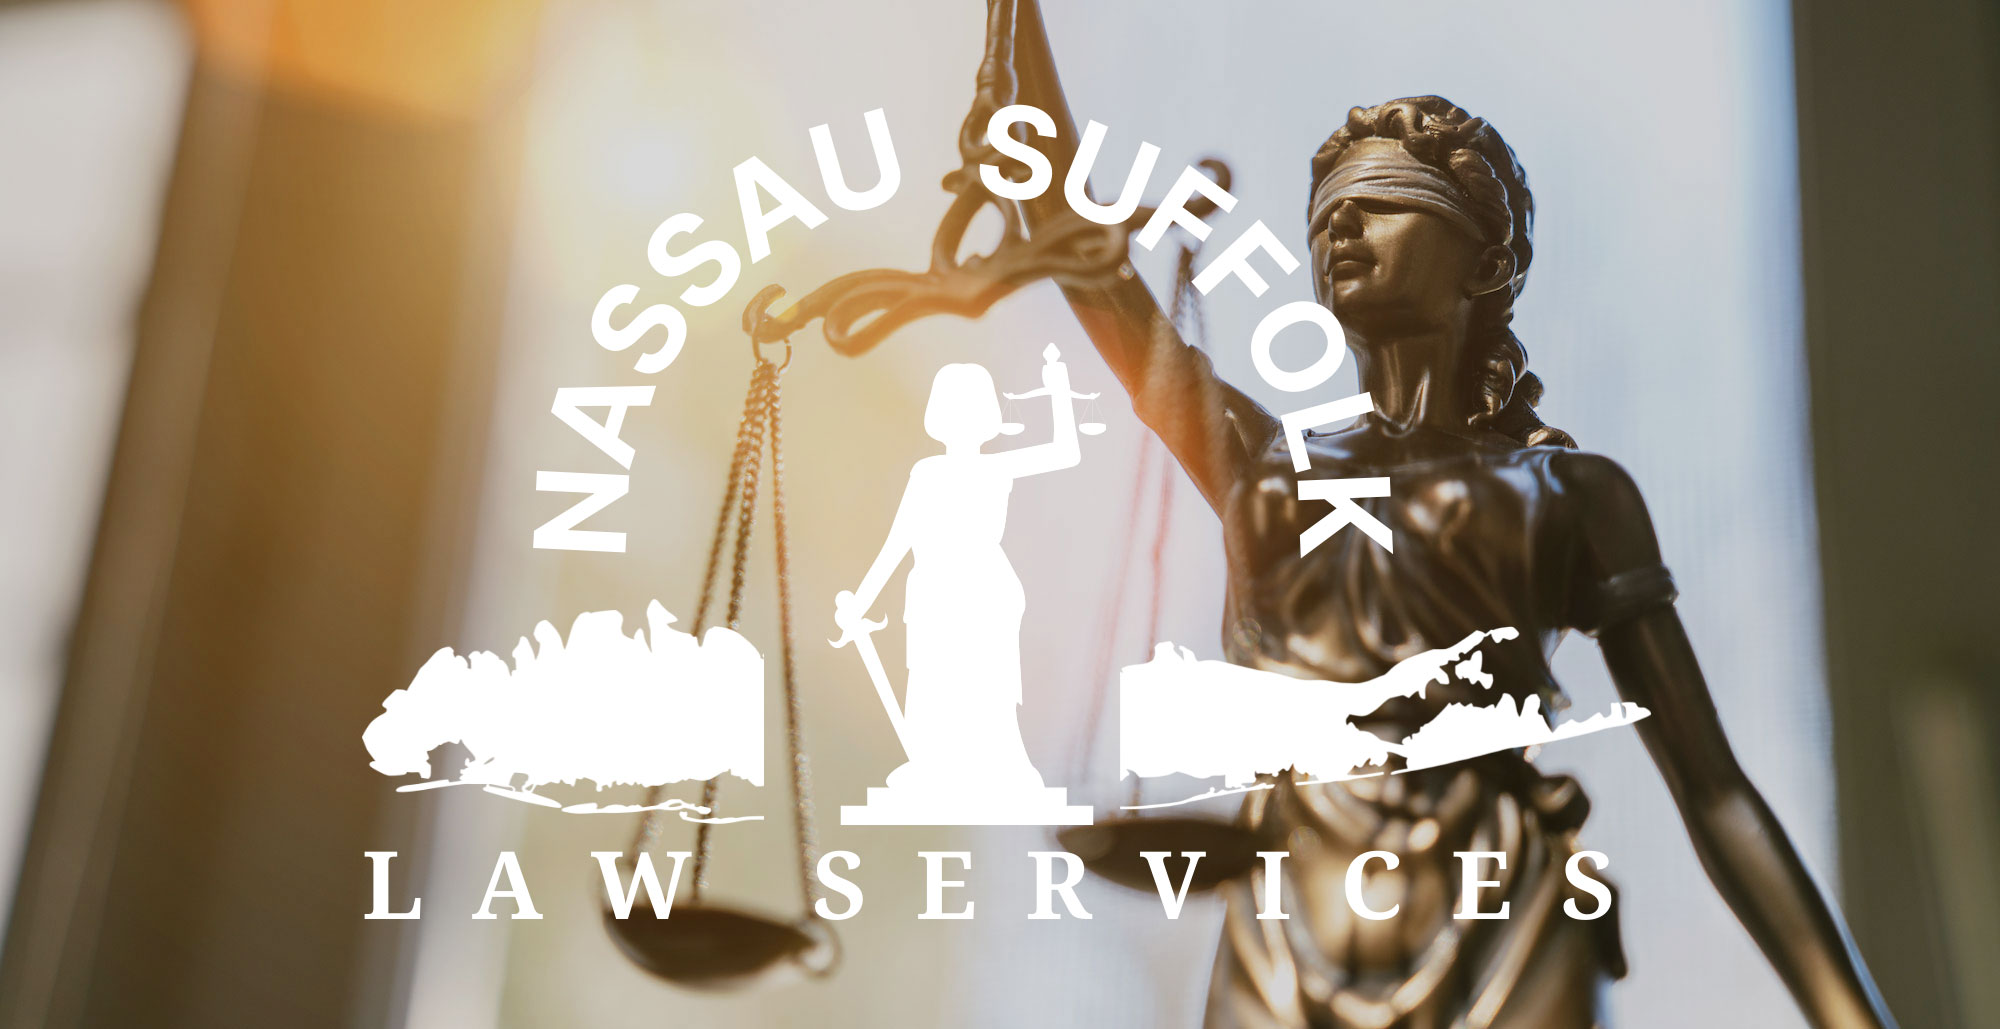 nassau-suffolk-law-services-website-banner-of-lady-justice